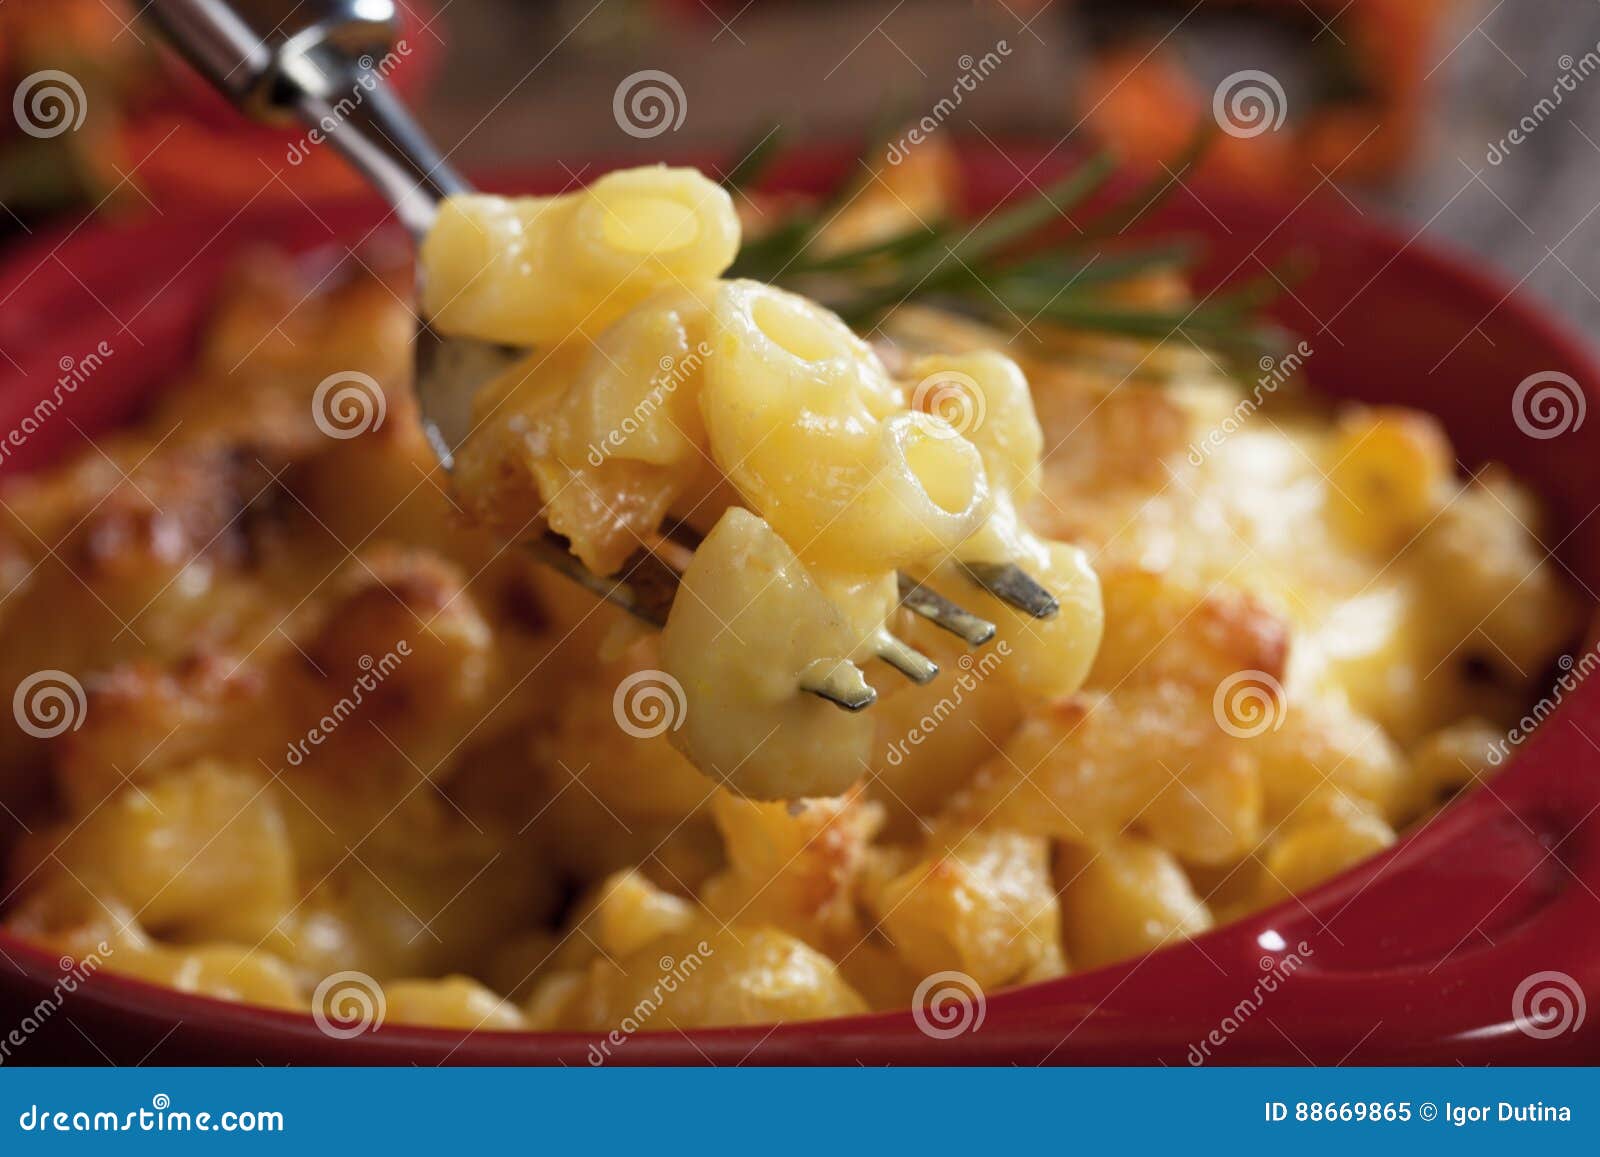 american mac and cheese pasta